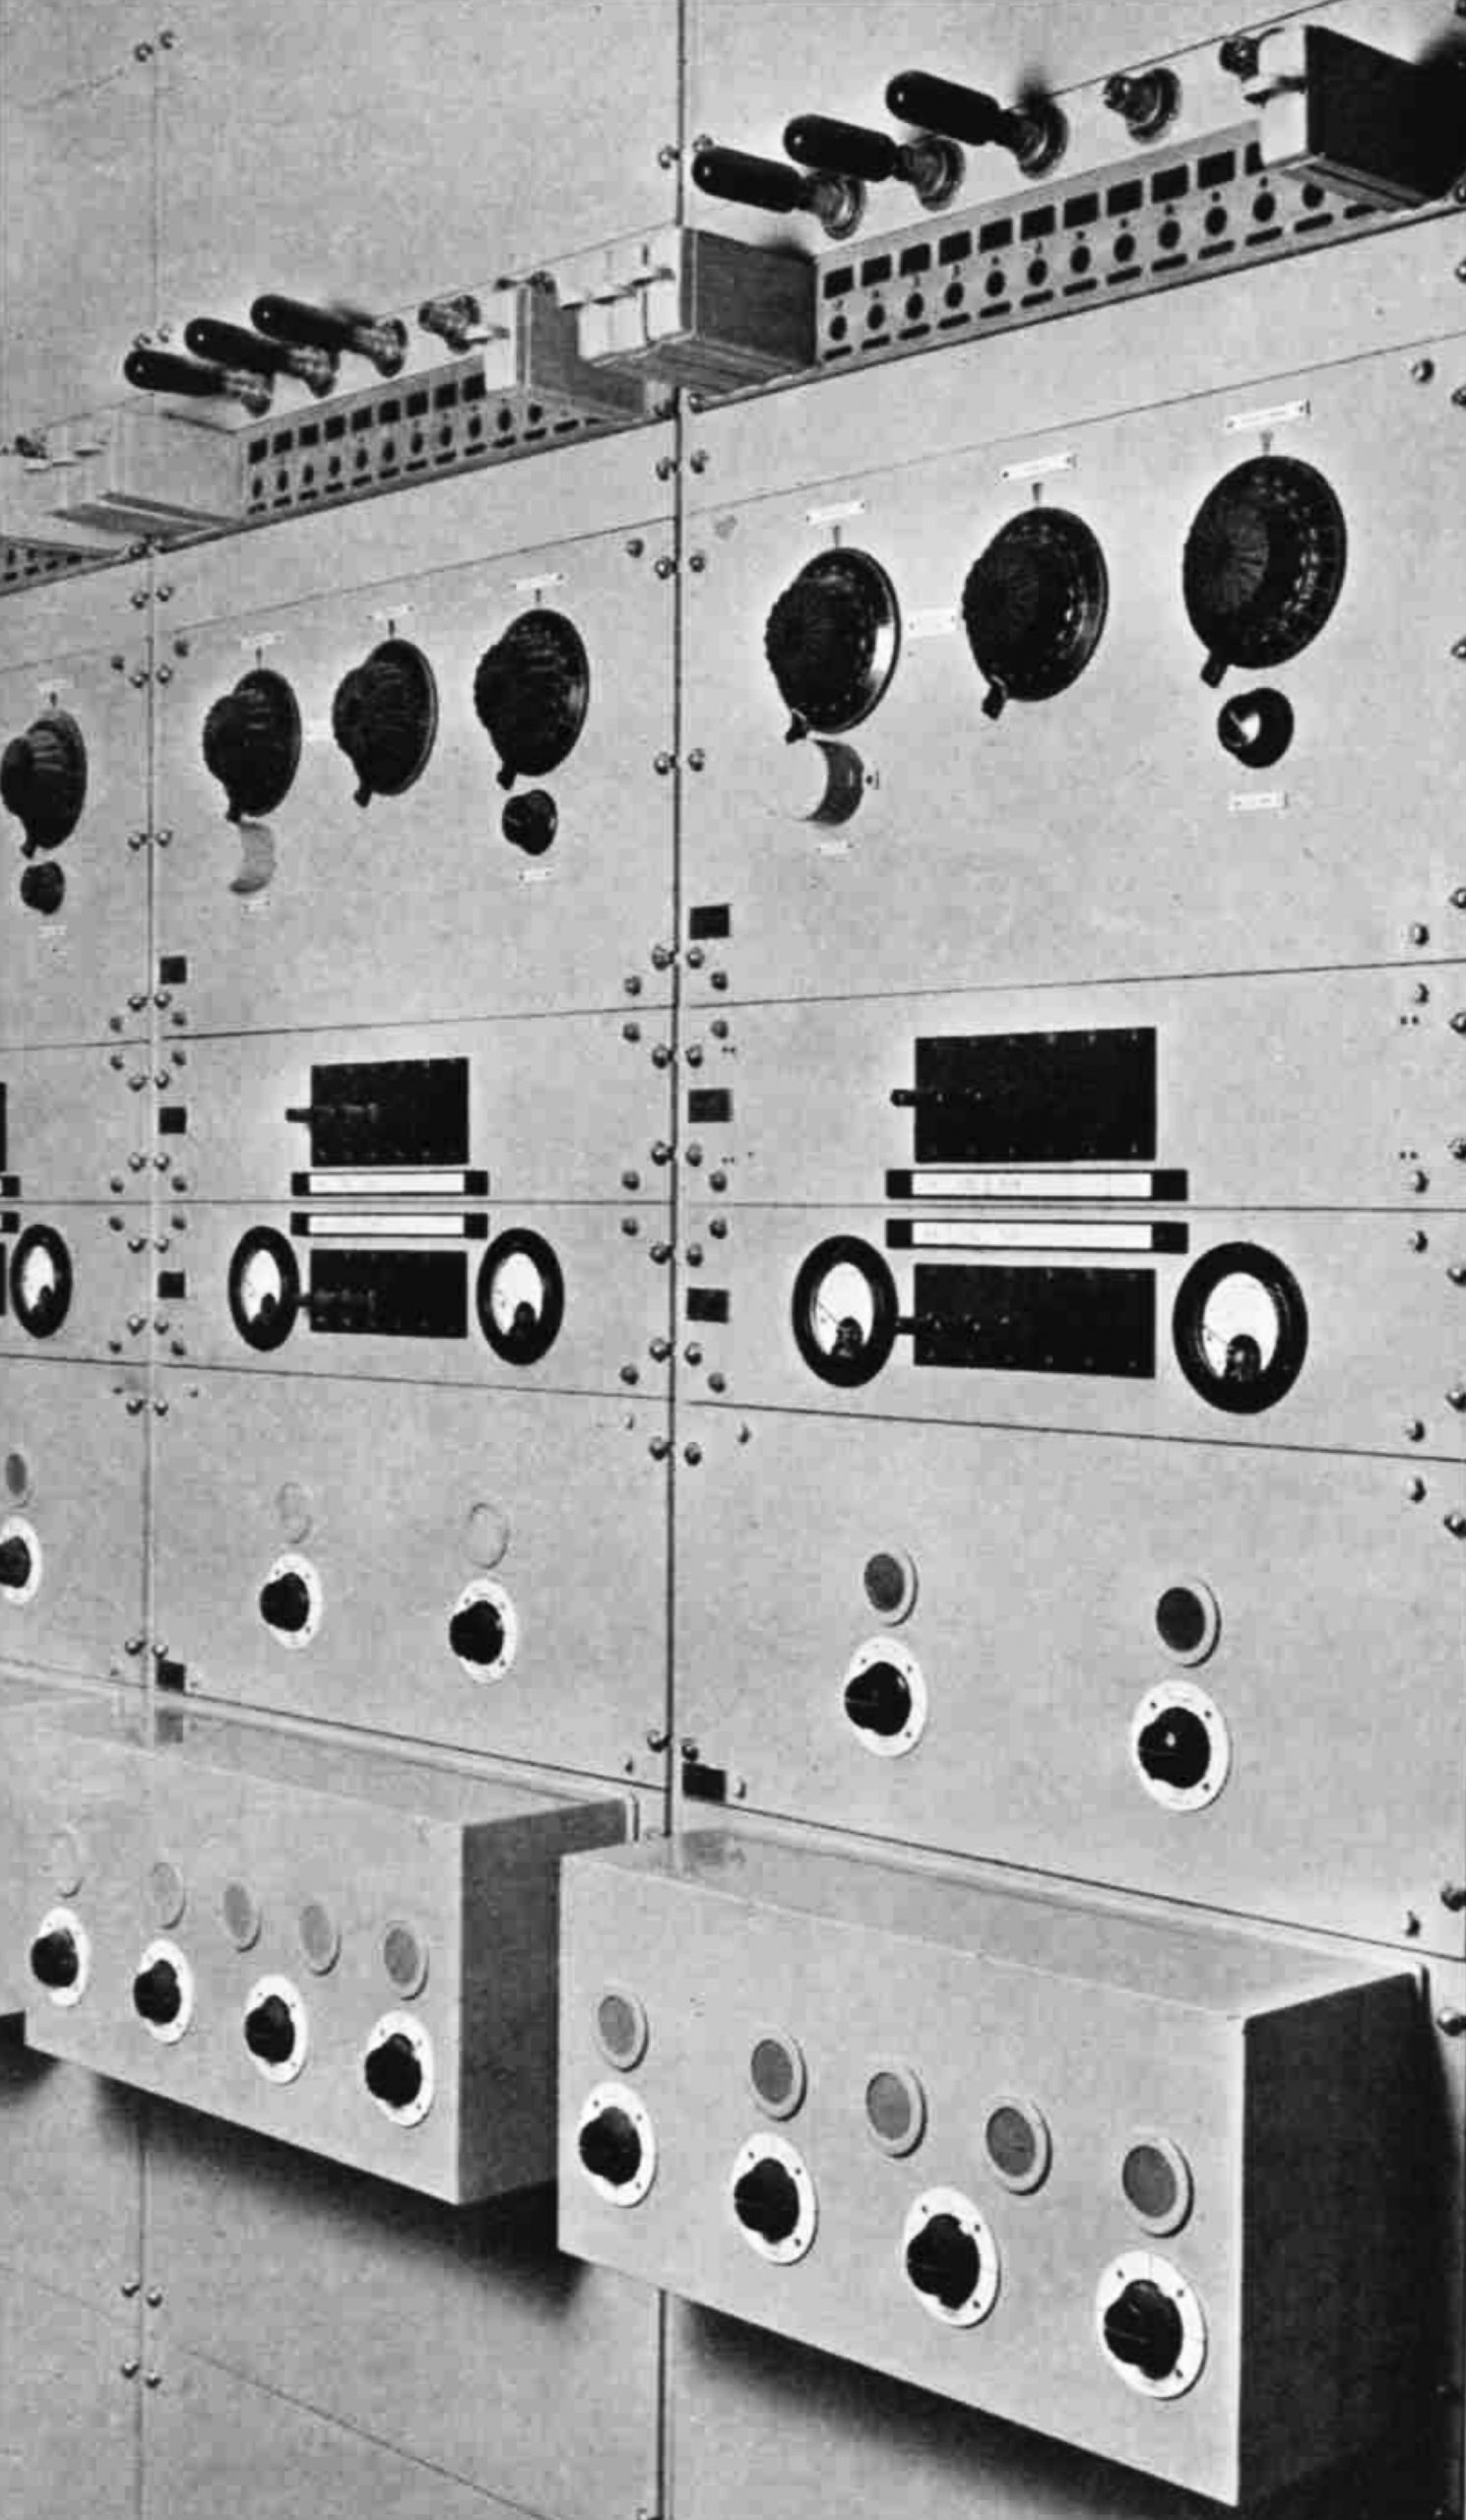 2 banks of equipment with dials and control knobs